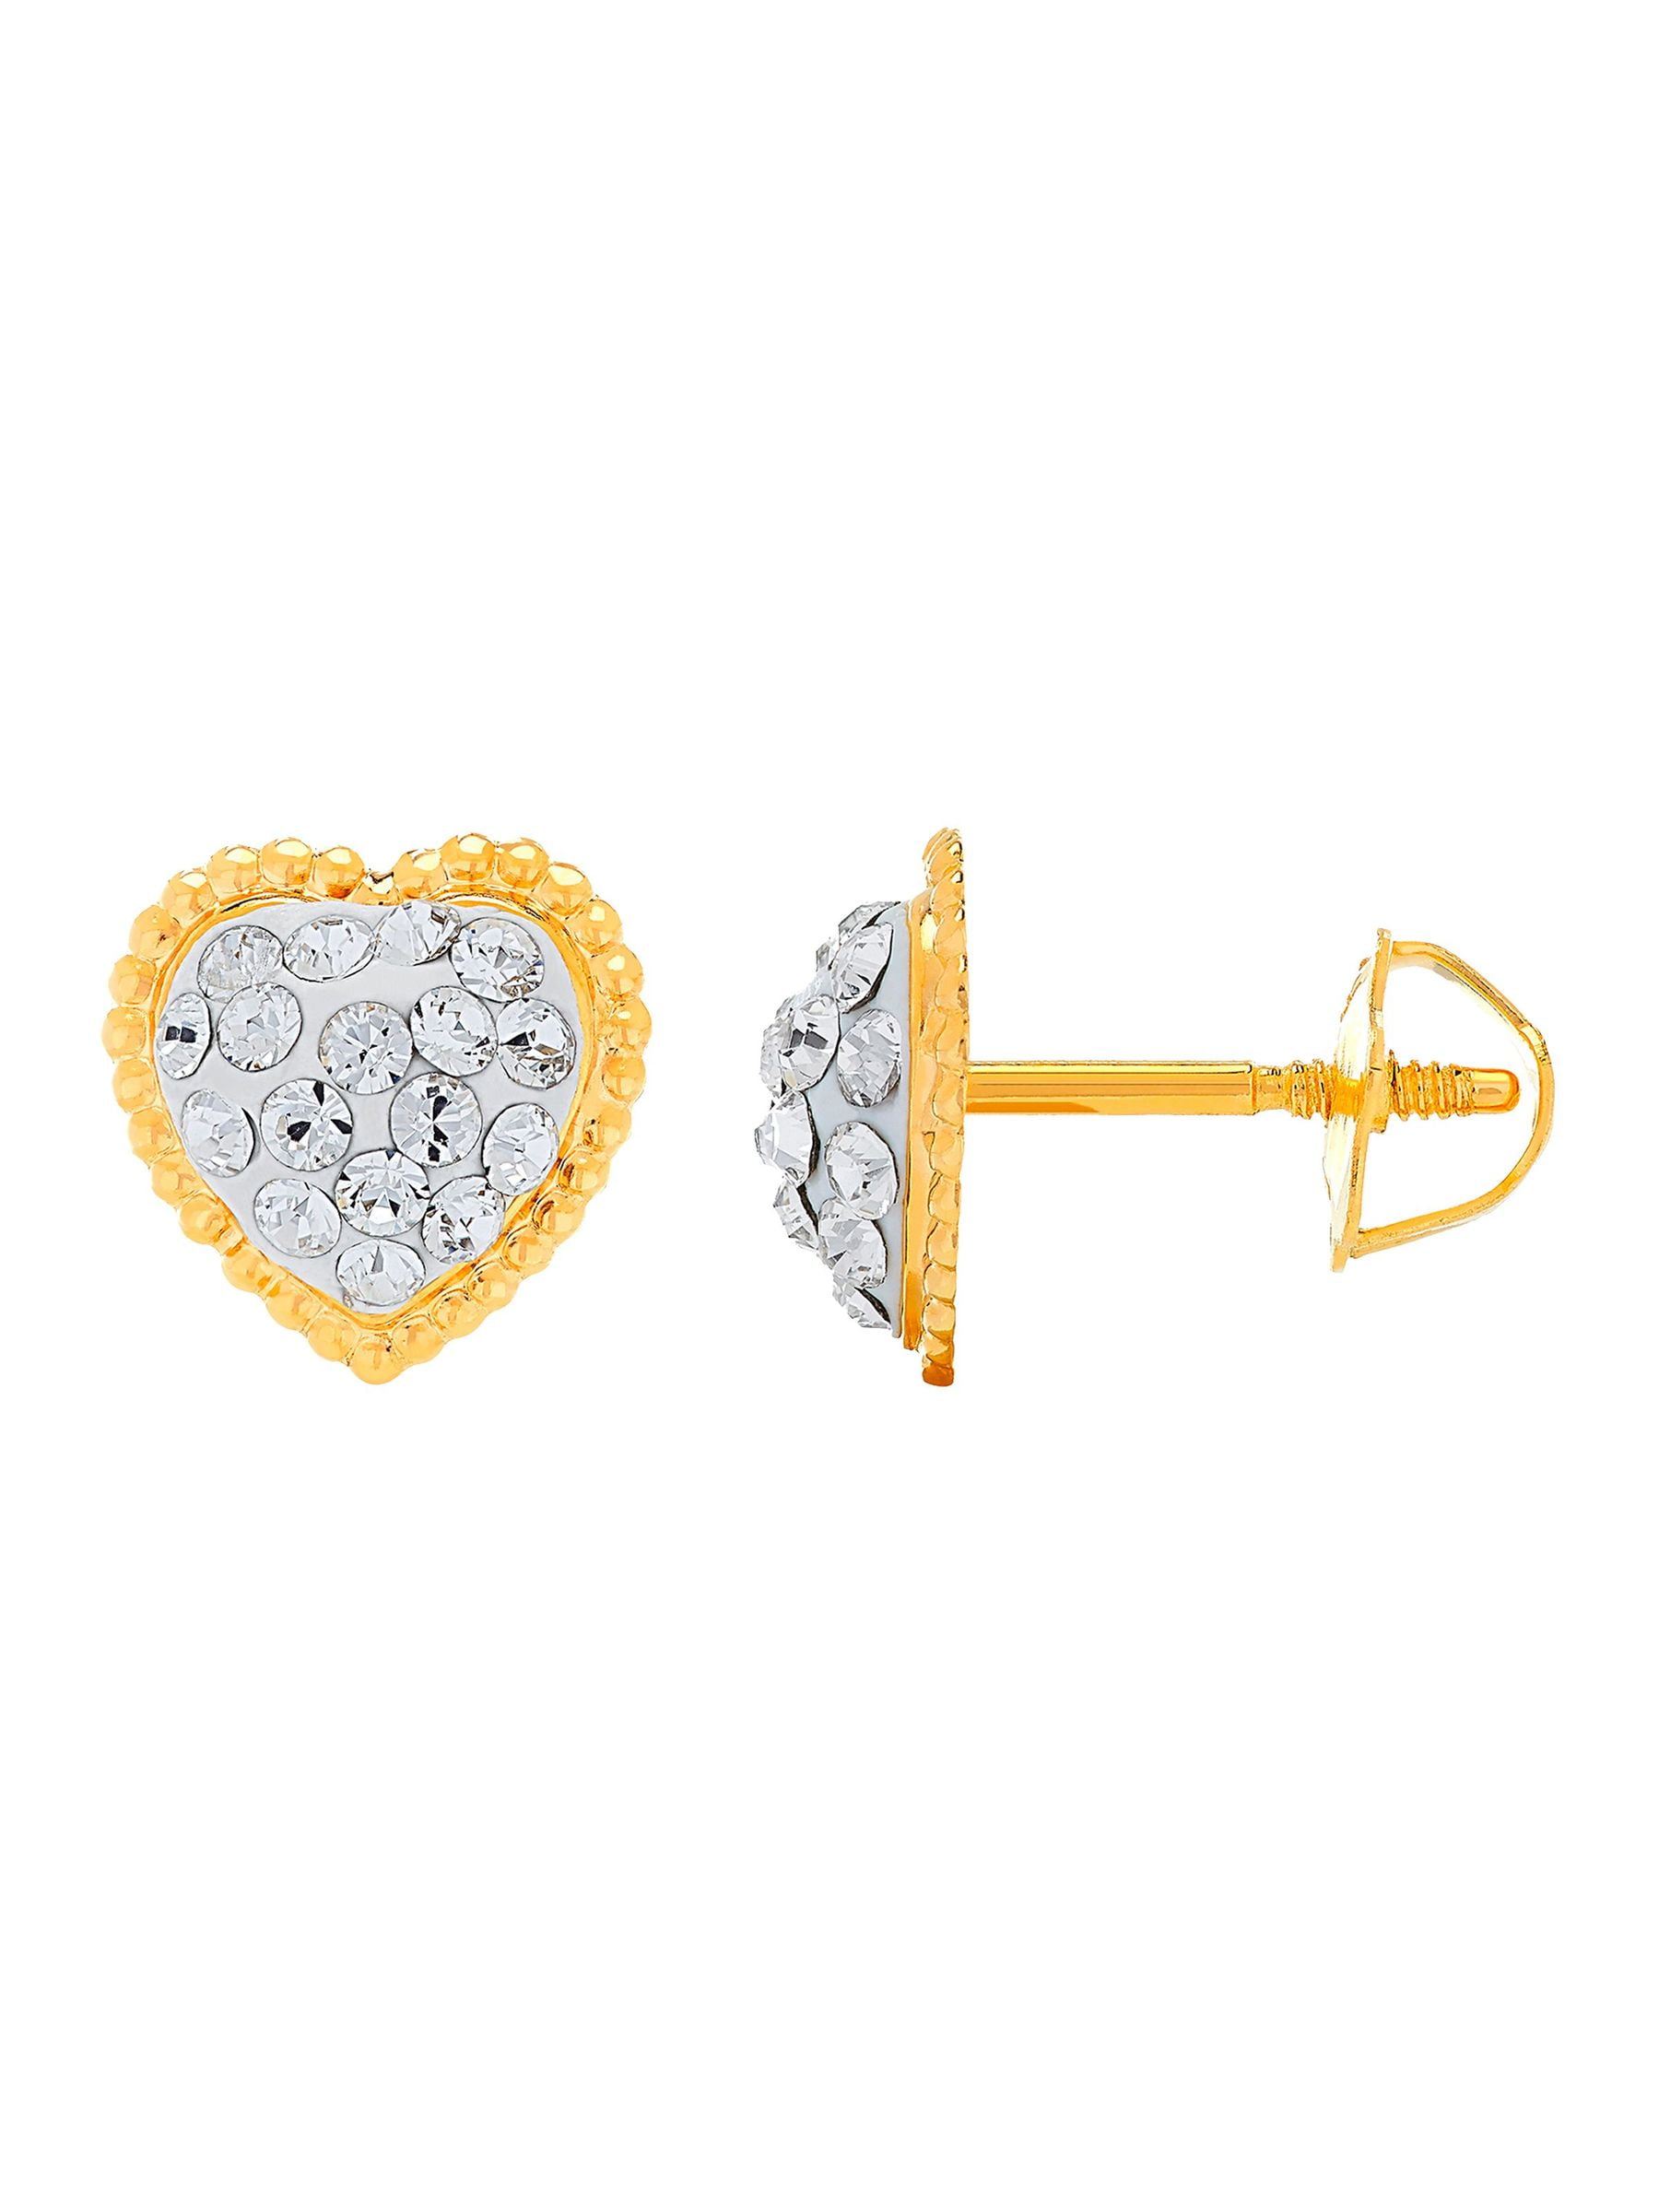 Details about   14K Yellow Gold Madi K Children's CZ 5 MM Star Post Stud Earrings MSRP $101 